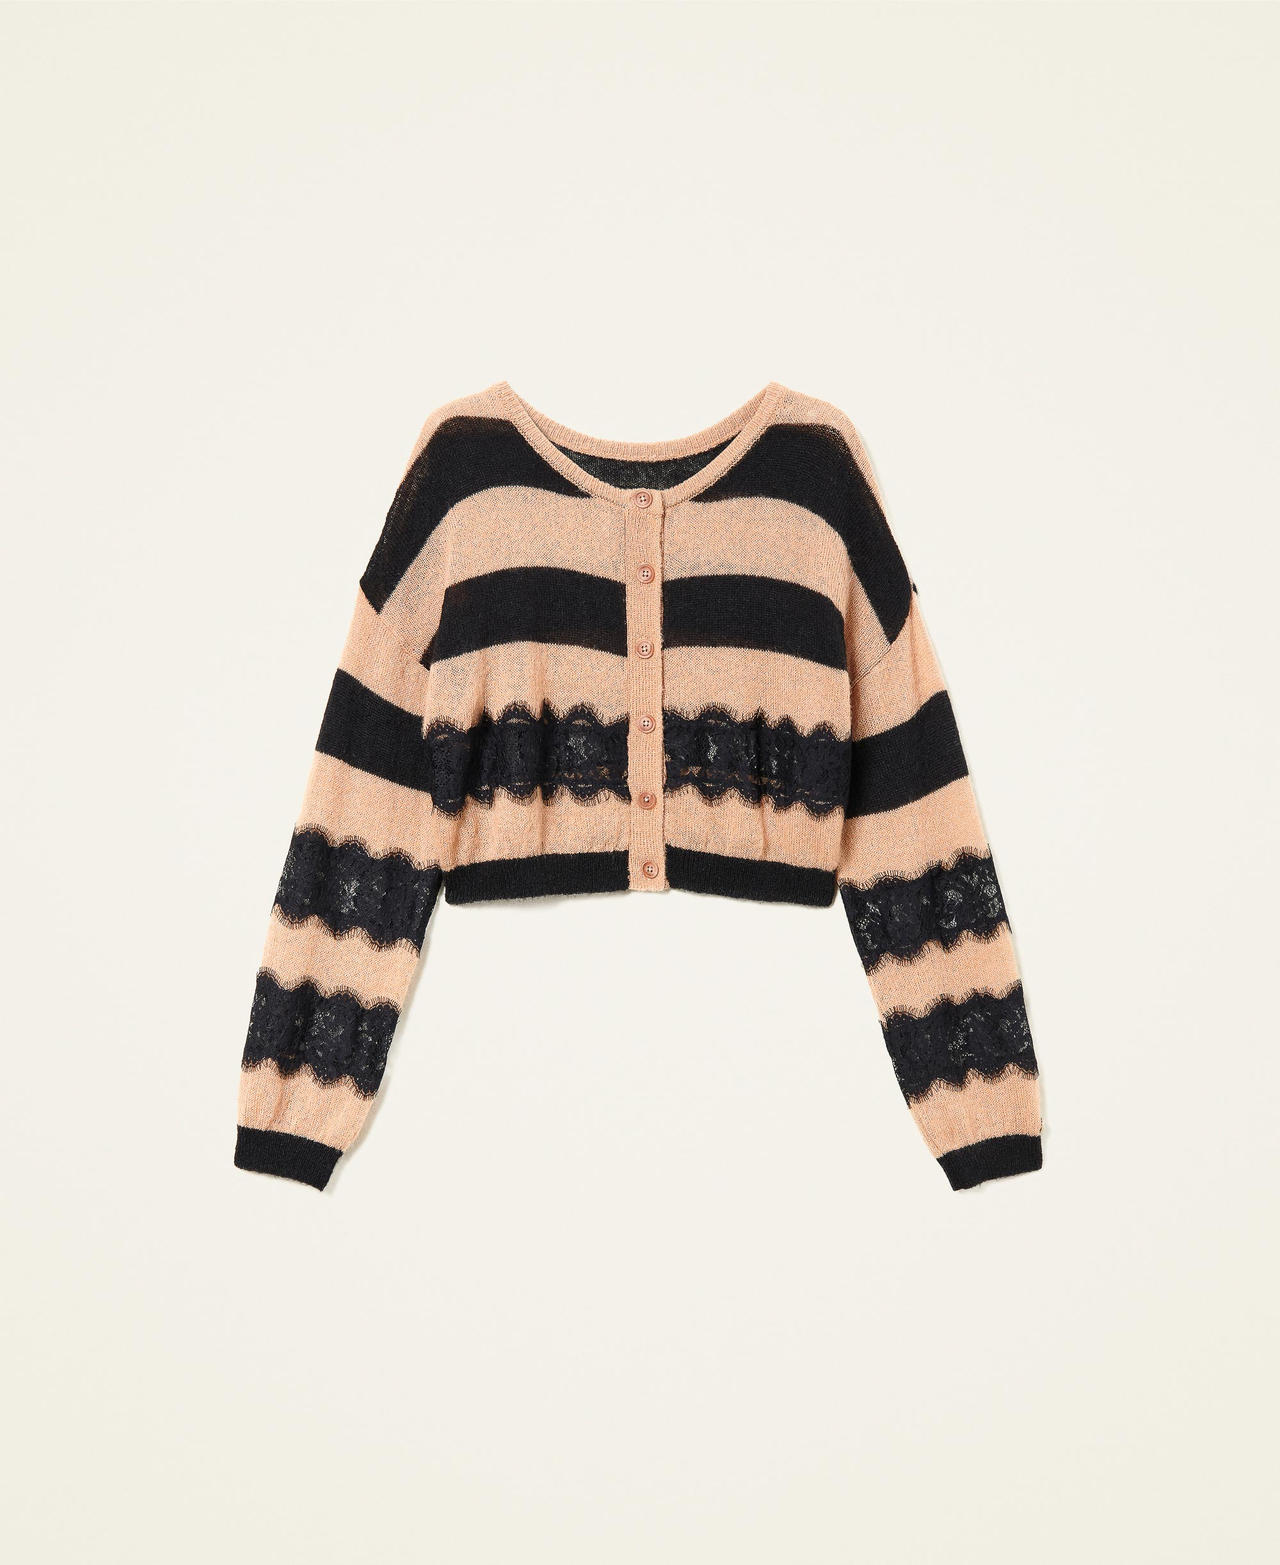 Striped jumper-cardigan with lace Two-tone Black / Pale "Dune" Beige Woman 222TP3132-0S